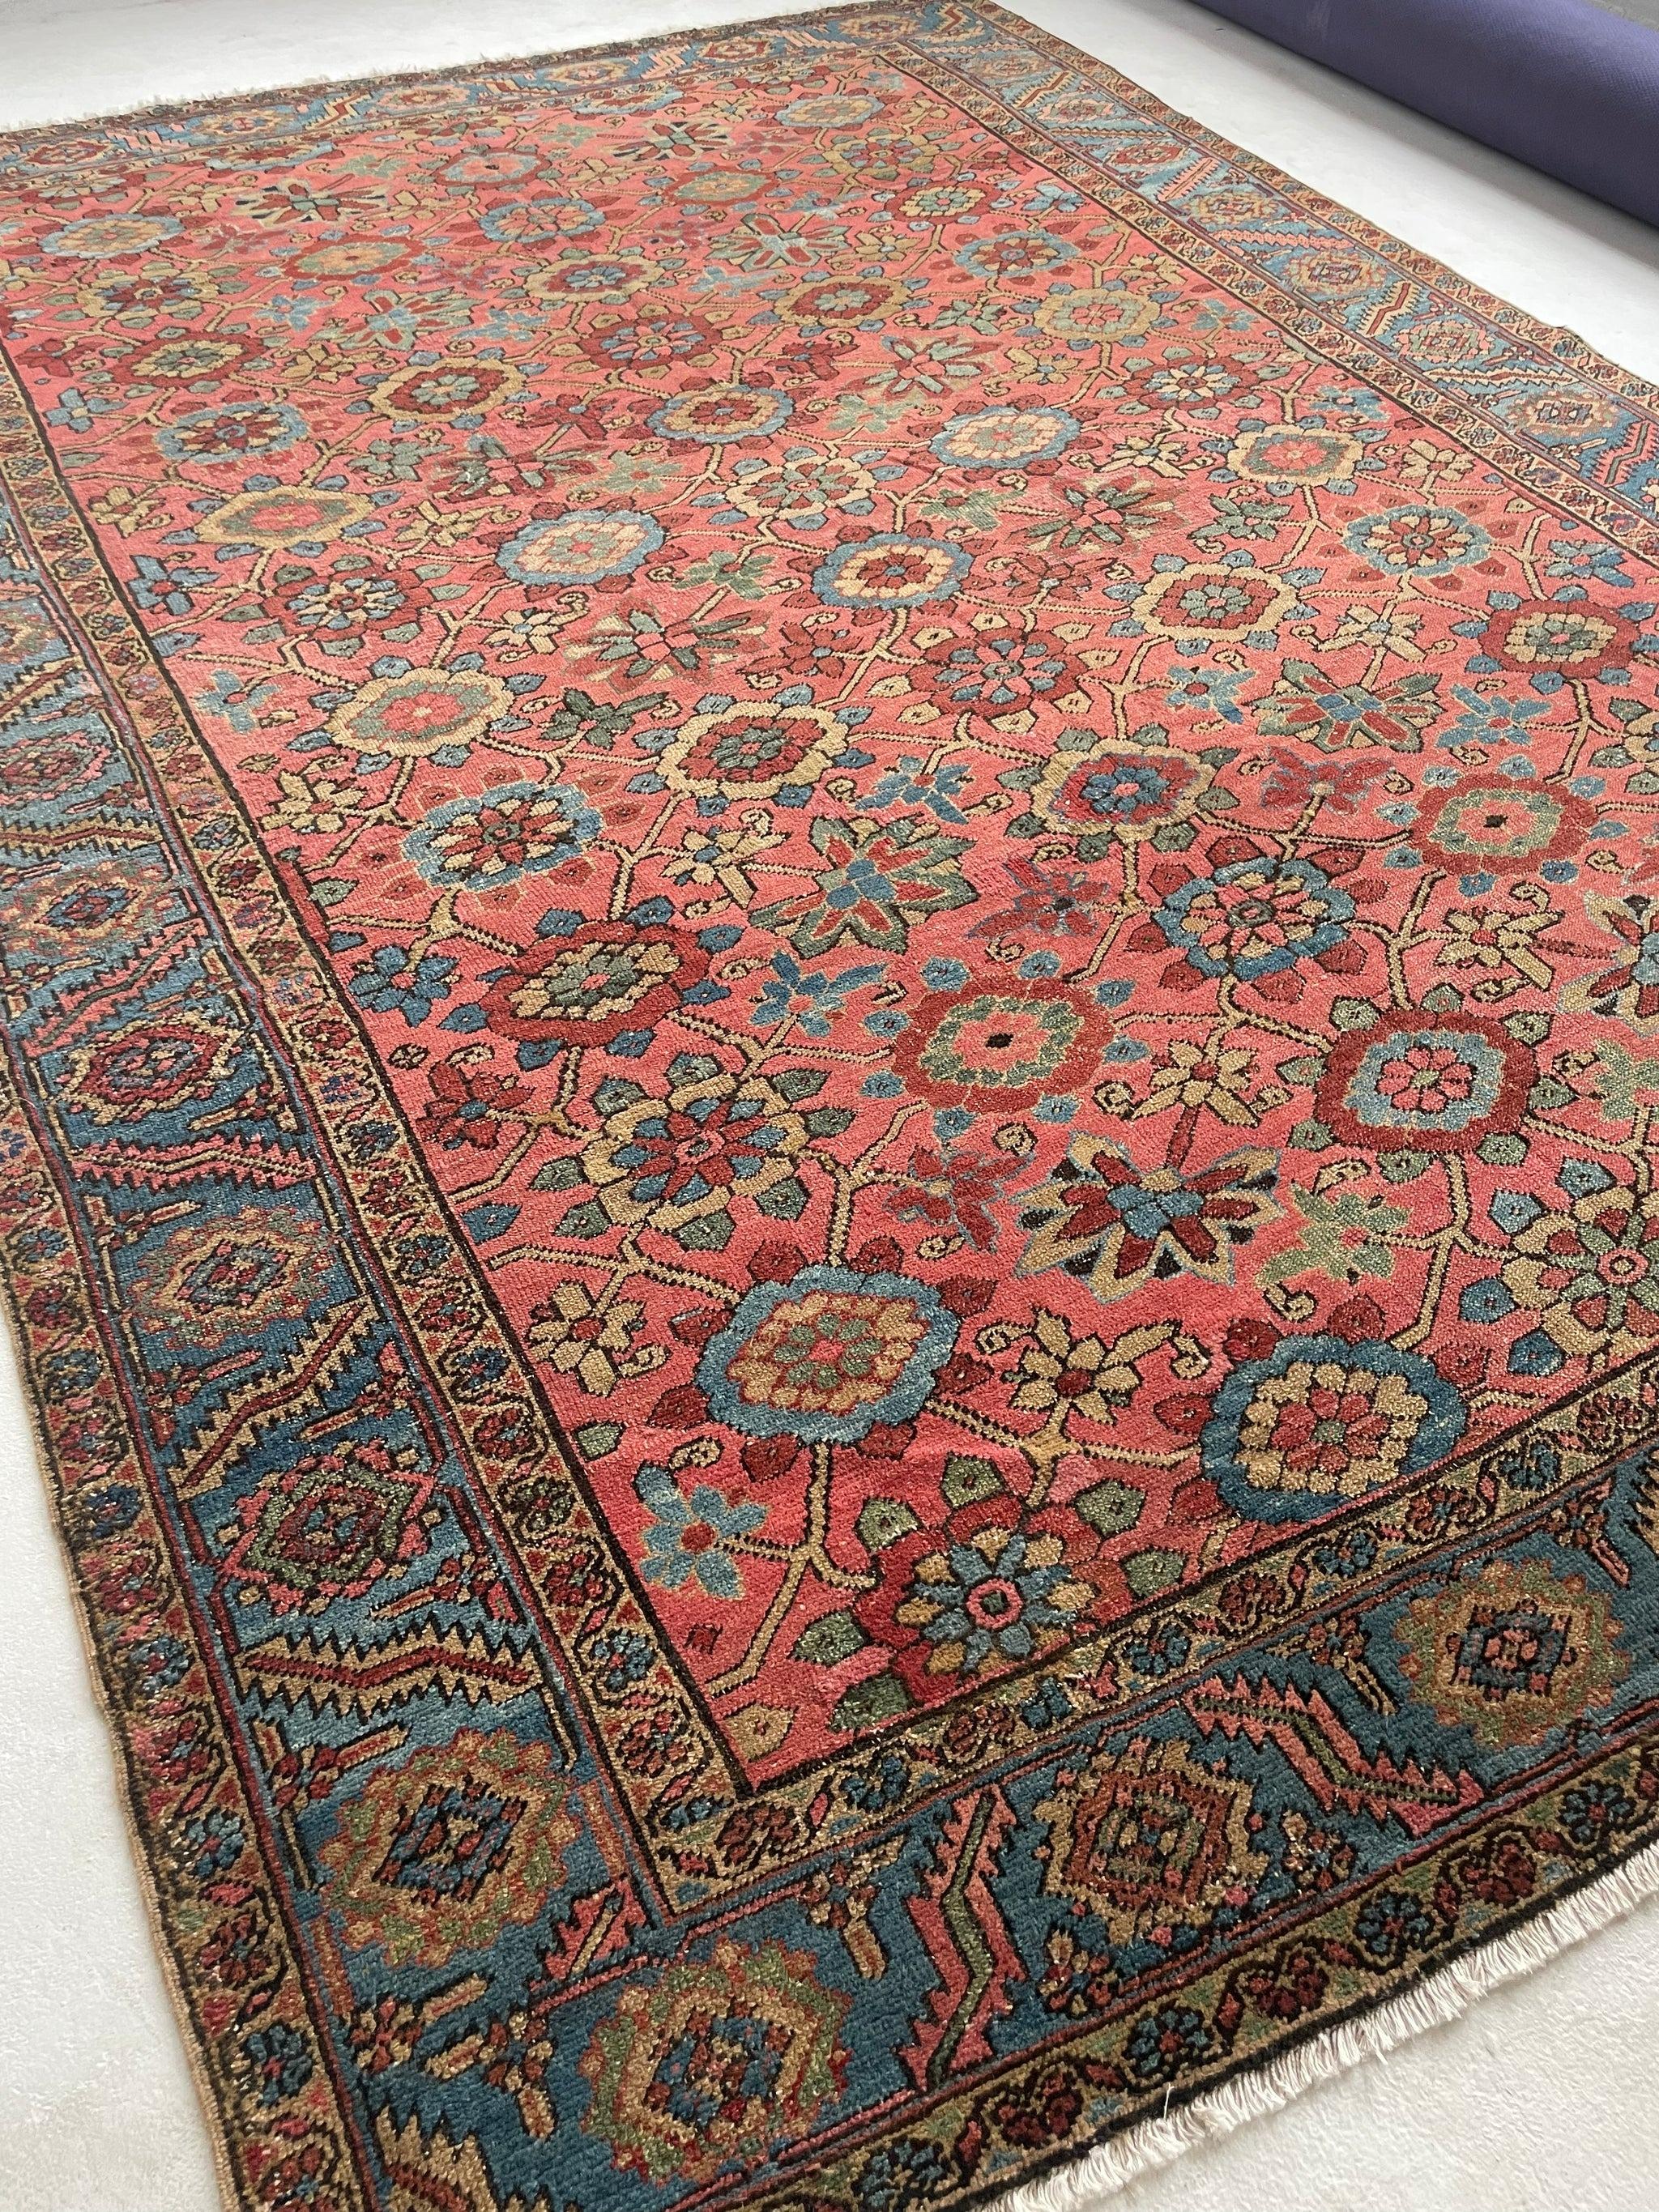 Wool Magnificent Antique Persian Heriz Rug with Rare Mina-Khani Design, circa 1920's For Sale